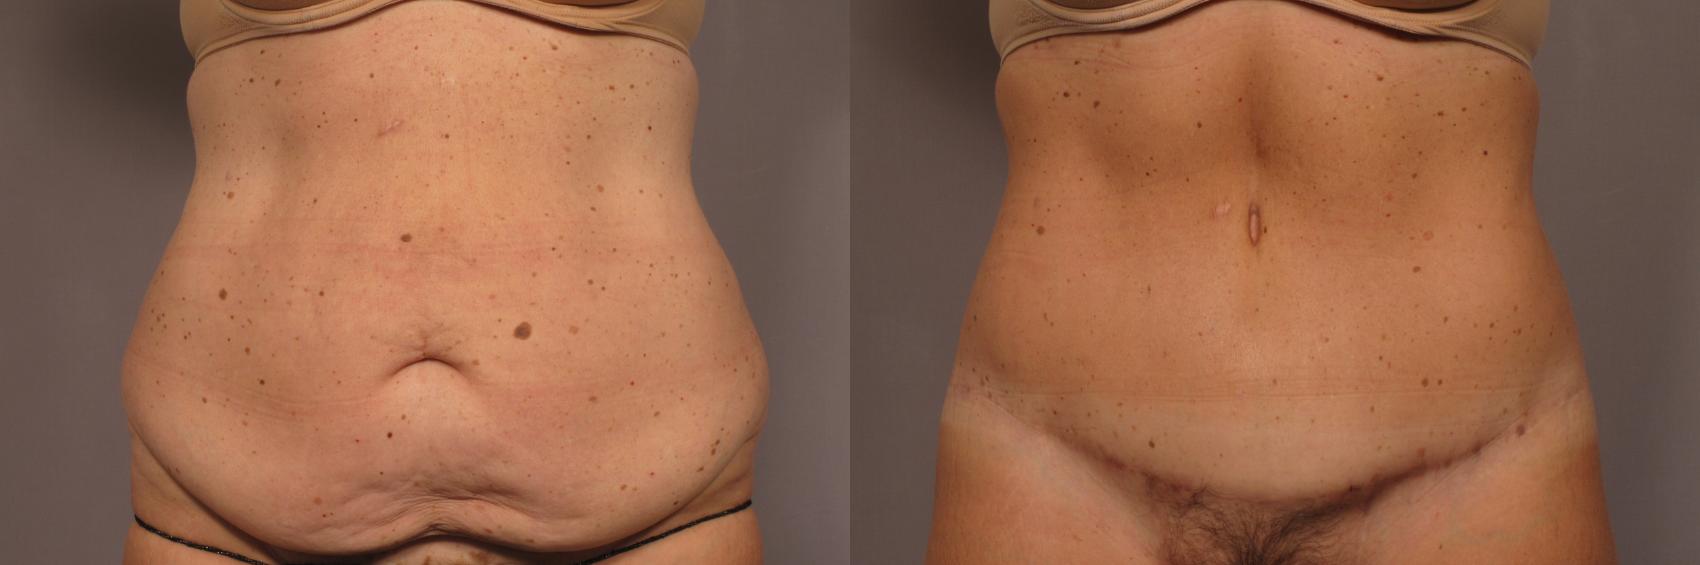 Tummy Tuck: Mistakes to Avoid After the Procedure